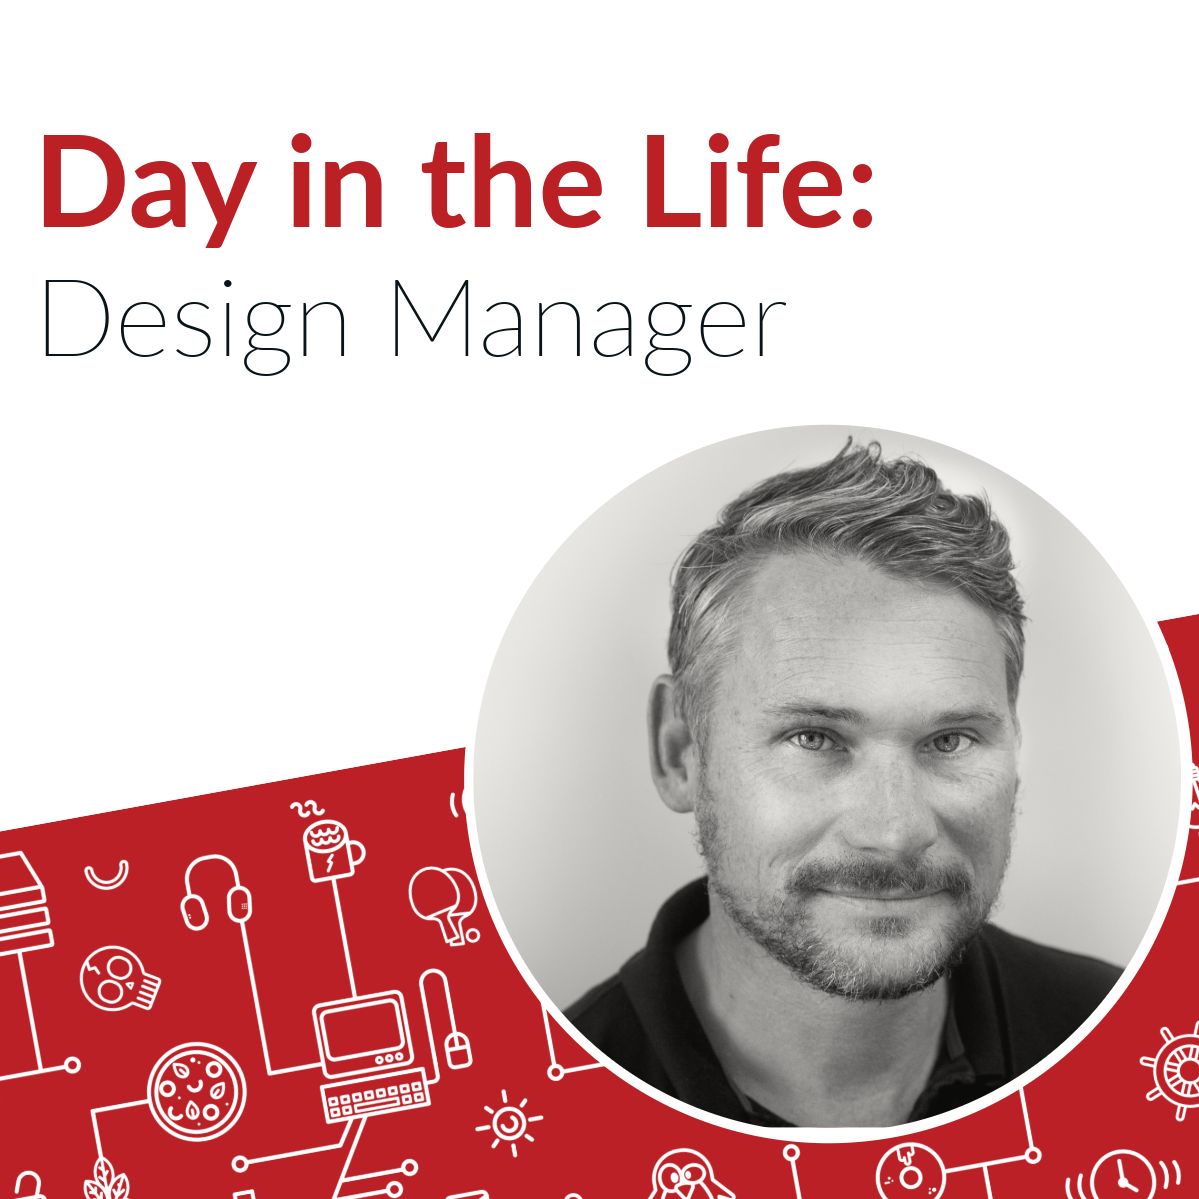 A Day in the Life of a Design Manager.